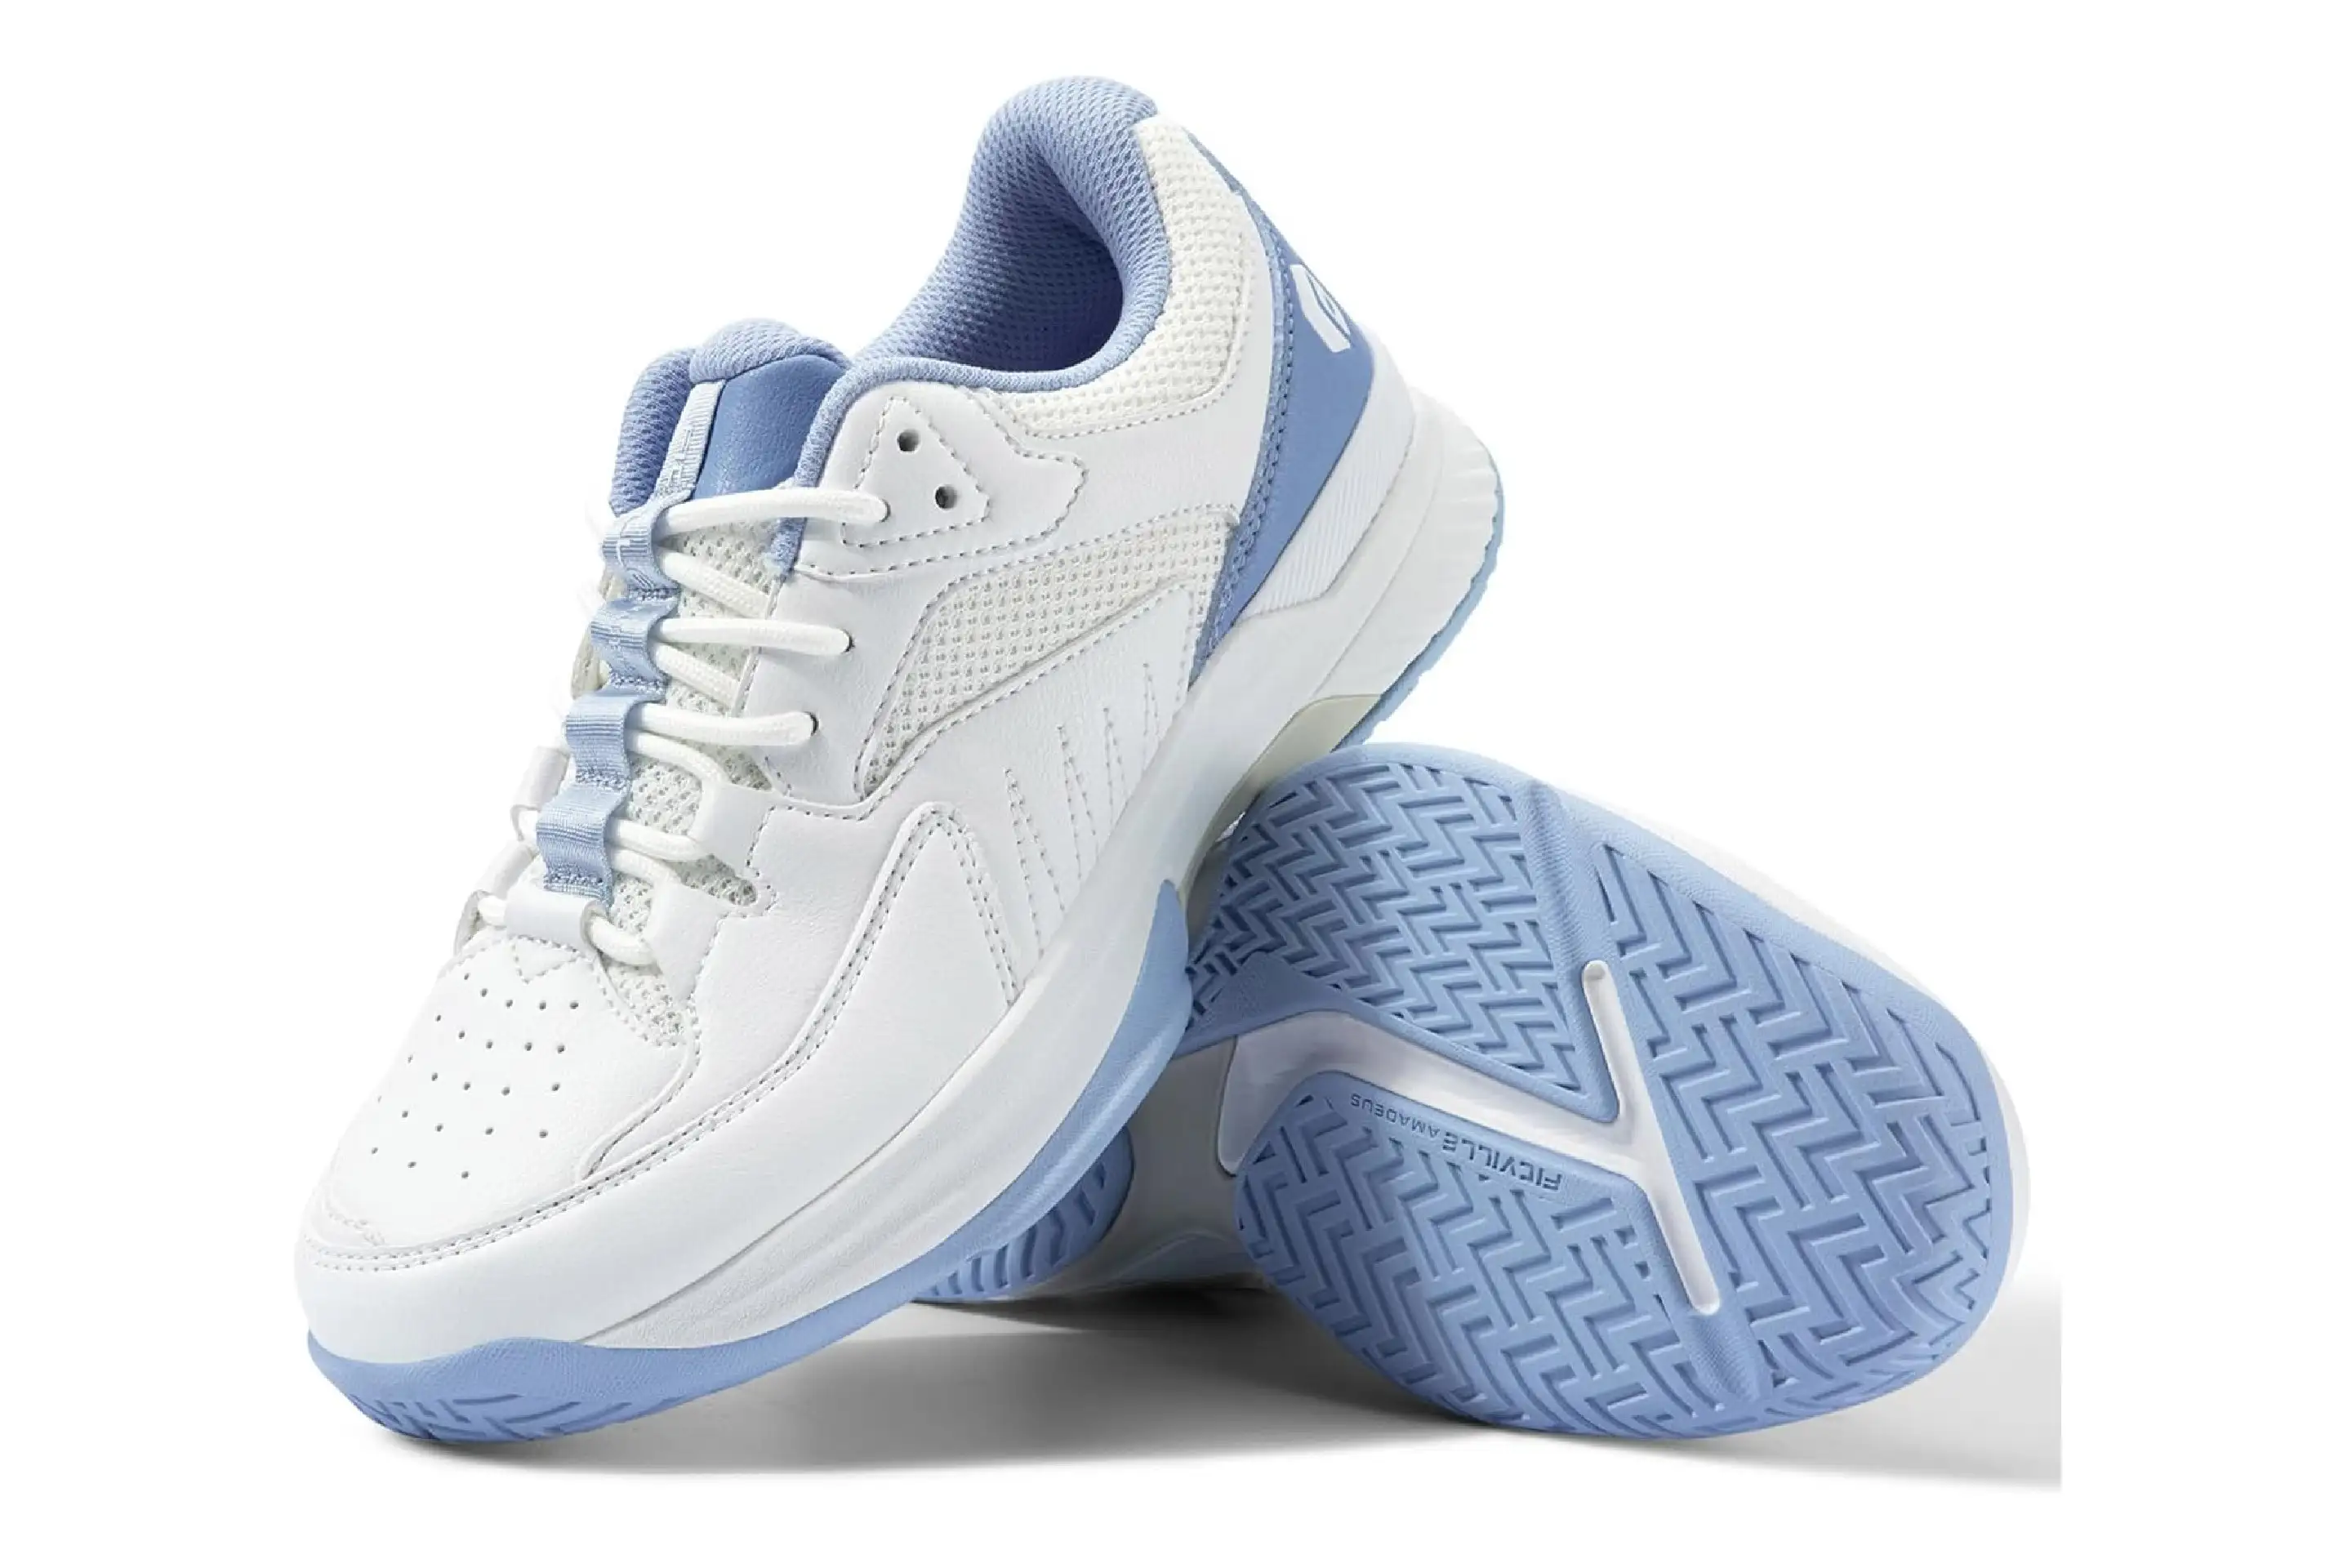 FitVille Wide Pickleball Shoes for Women